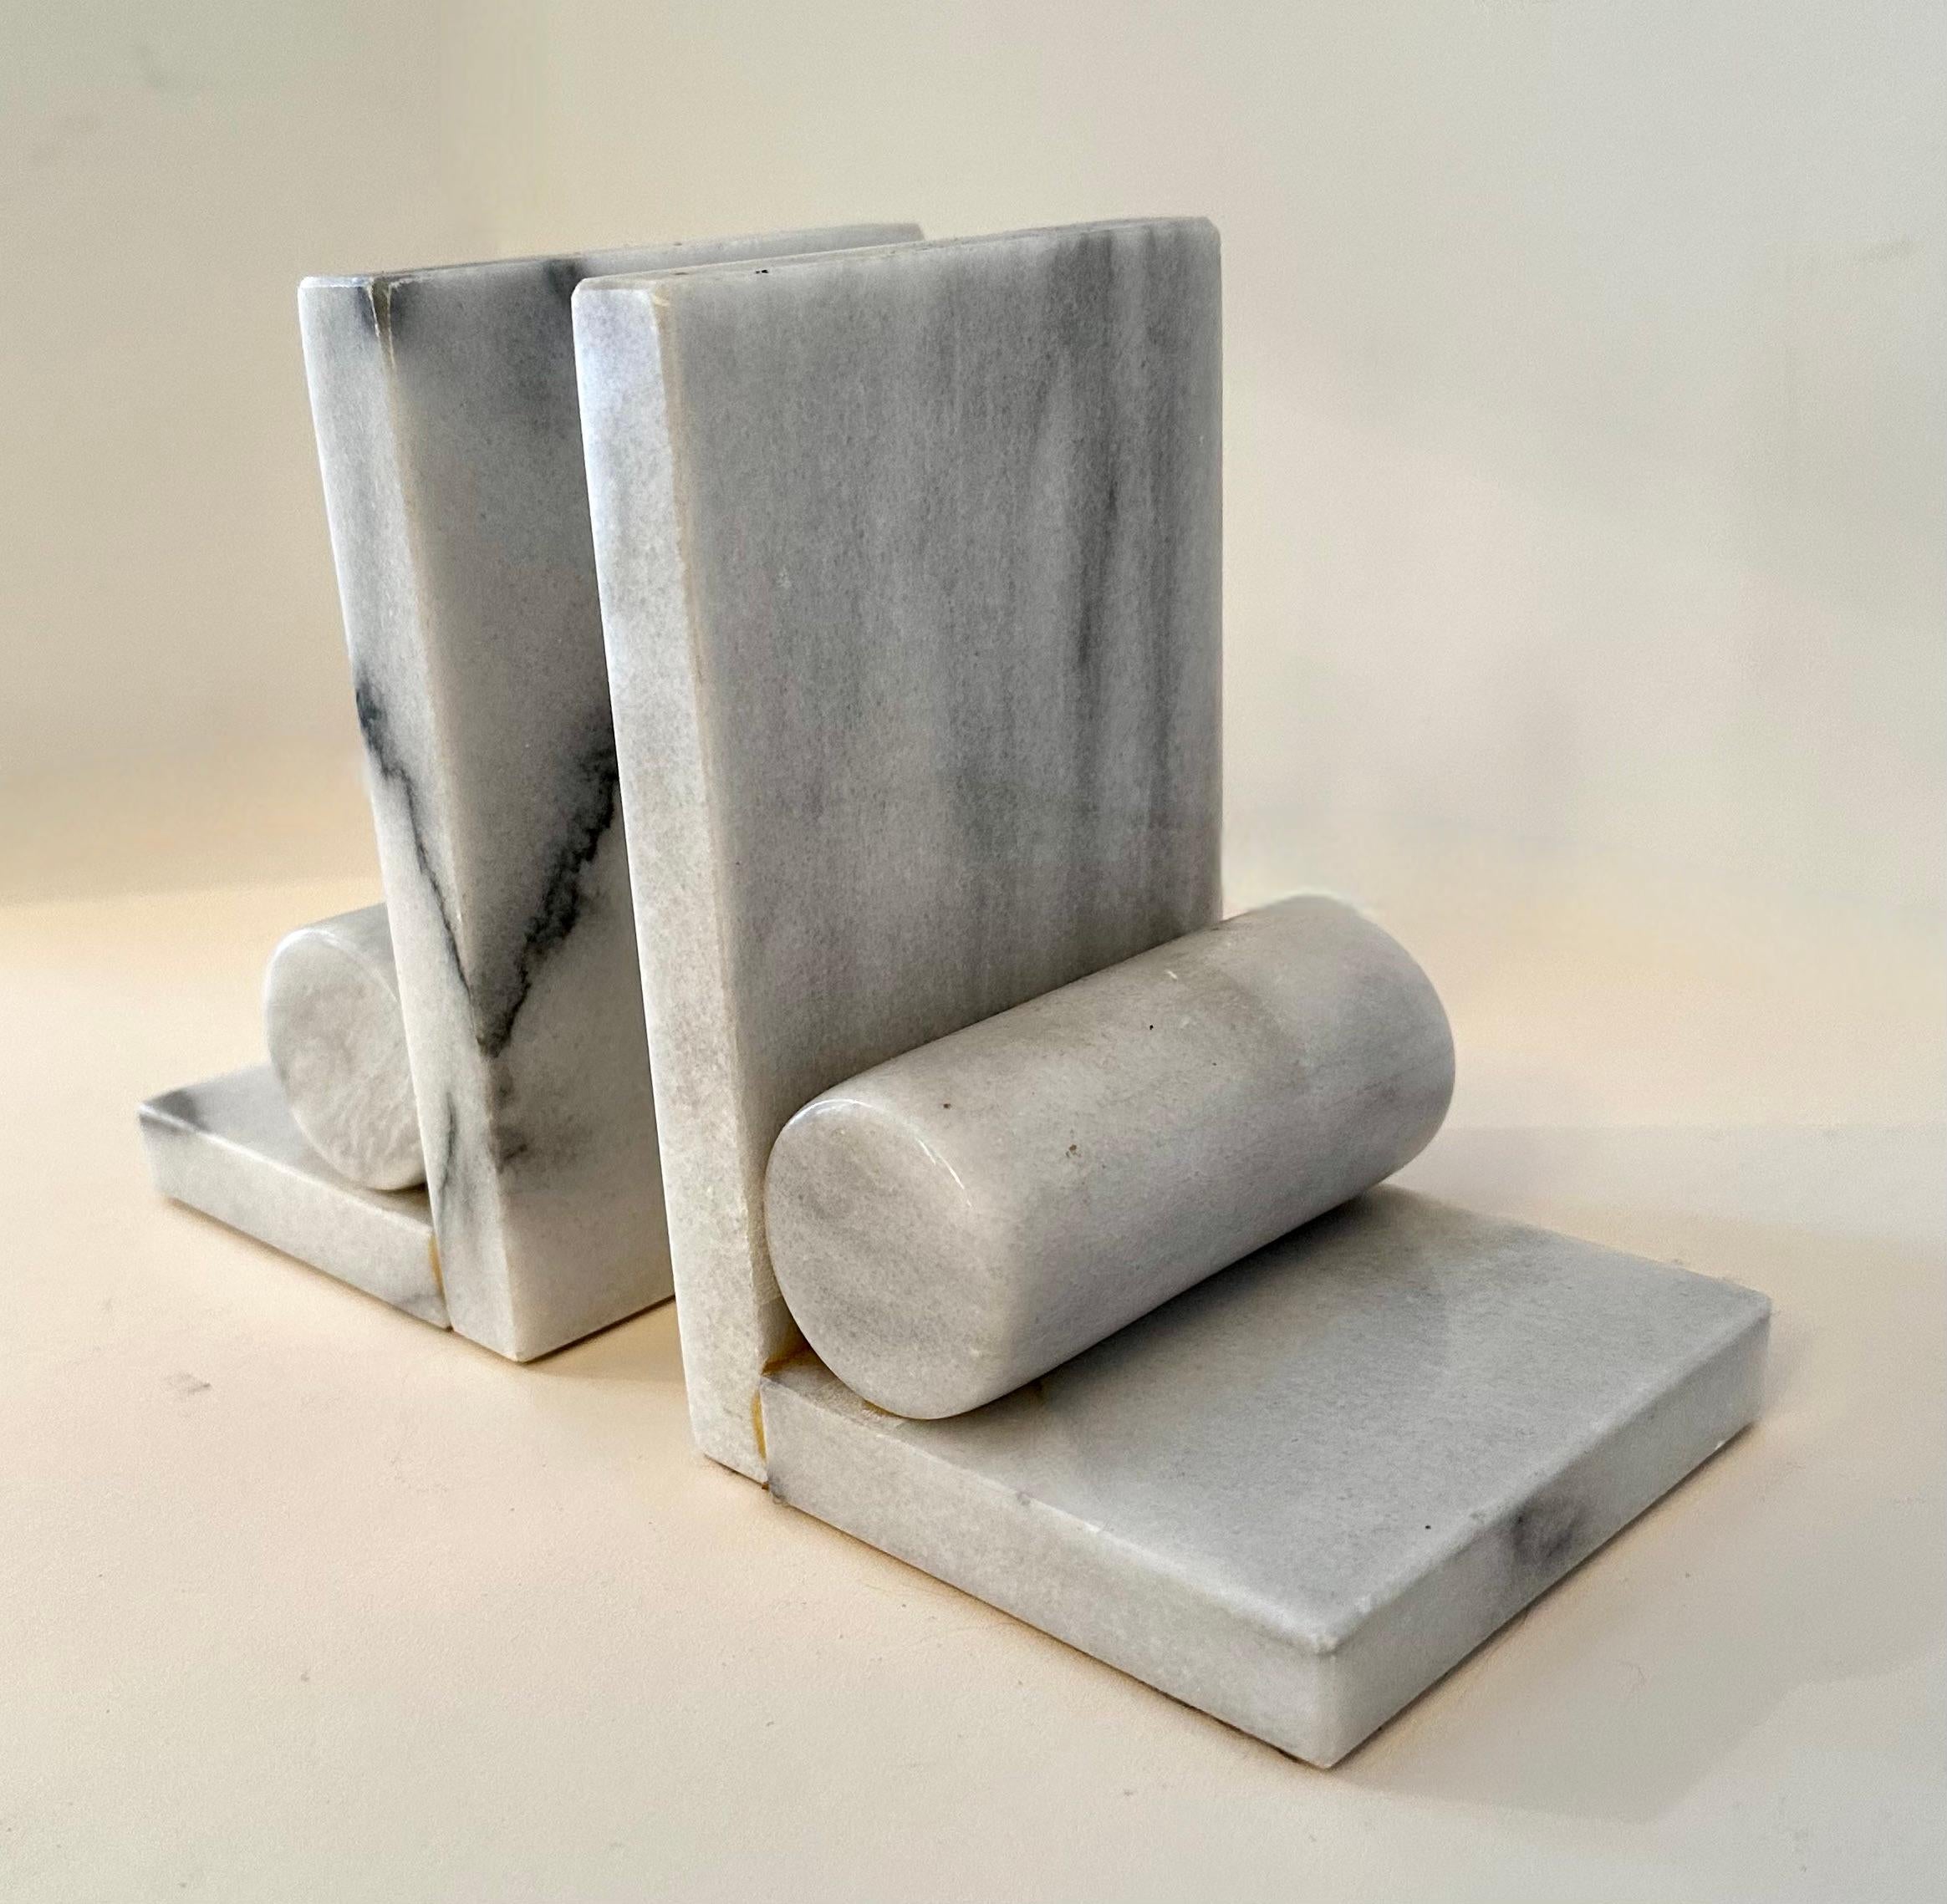 A lovely pair of Carrara marble bookends - two 90 degree angle pieces with a solid cylinder as a very nice and simple detail. 

The pair would be a complement to any desk, or work station. In the office, kitchen or den. A wonderful, heavy and